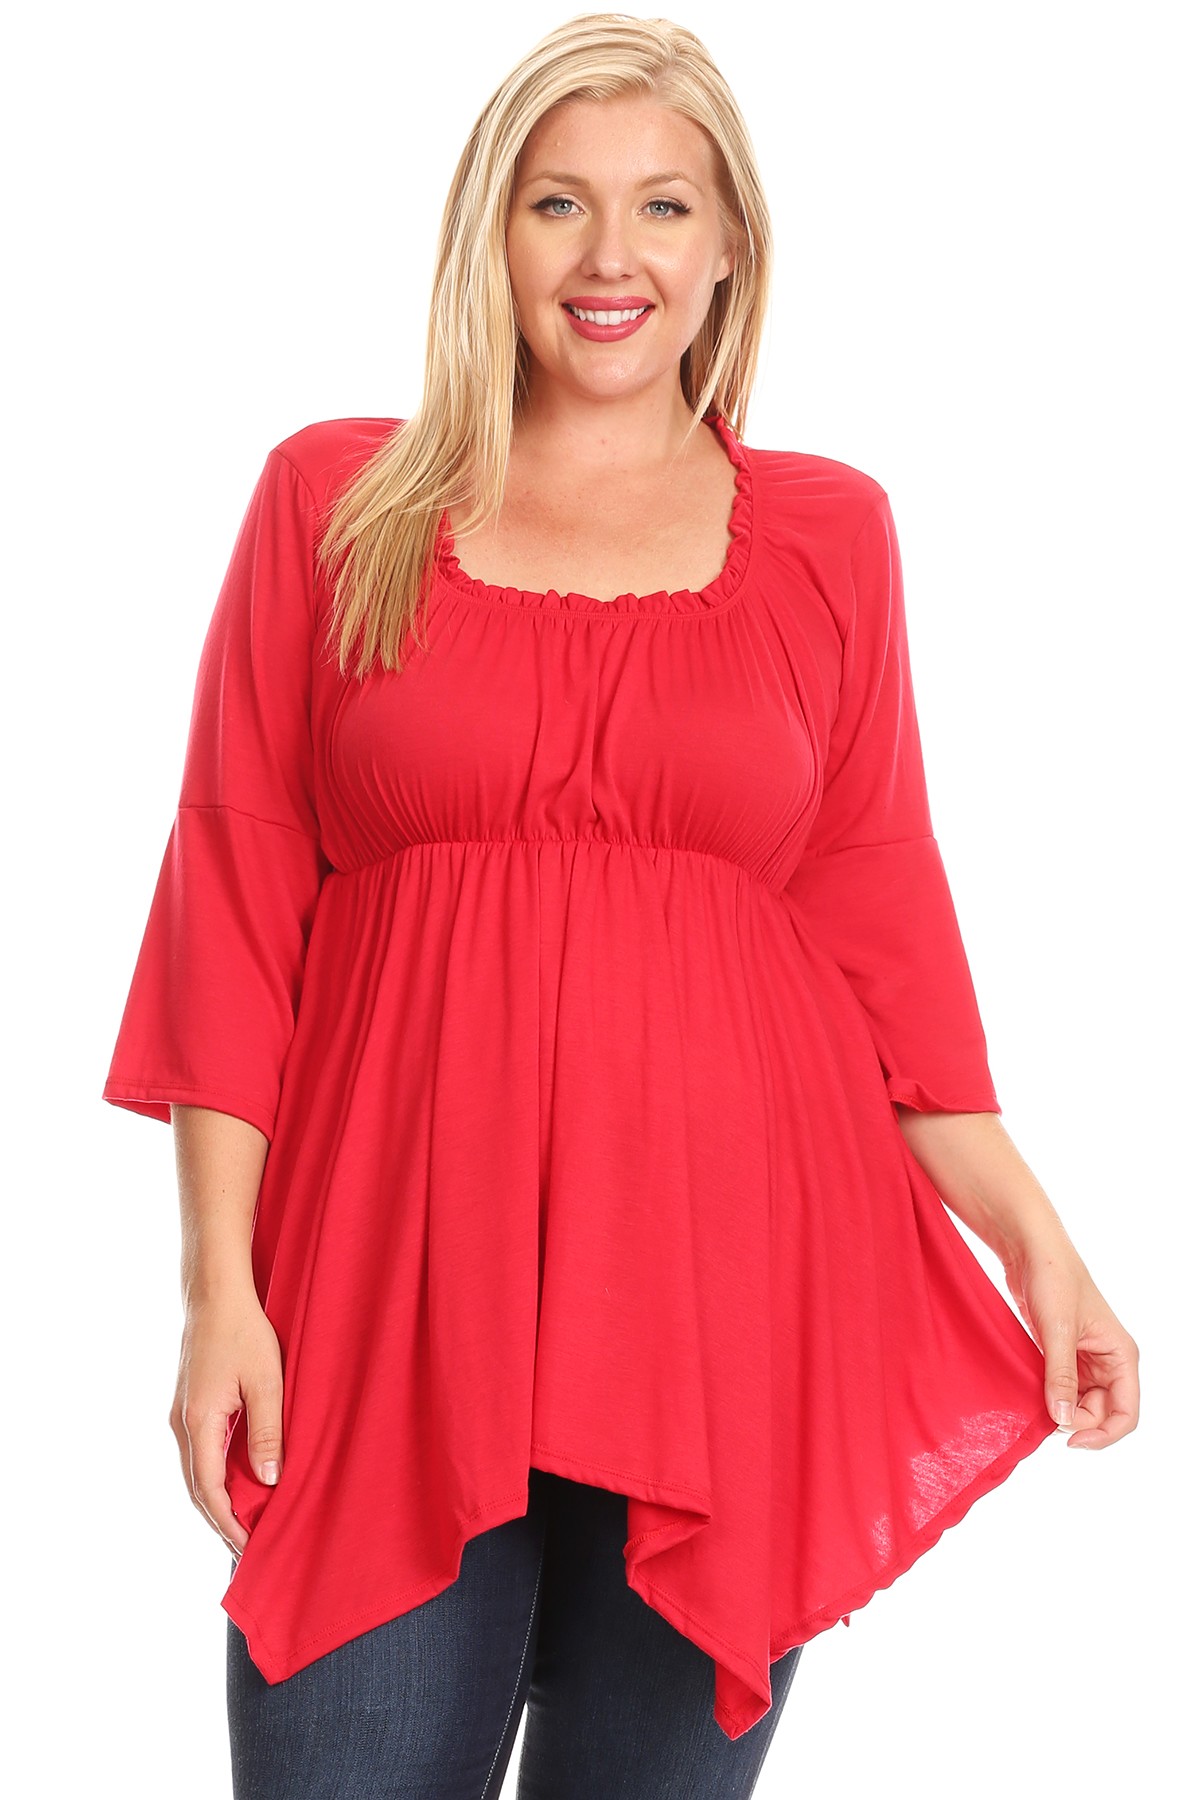 EMPIRE WAIST TOP IN RED